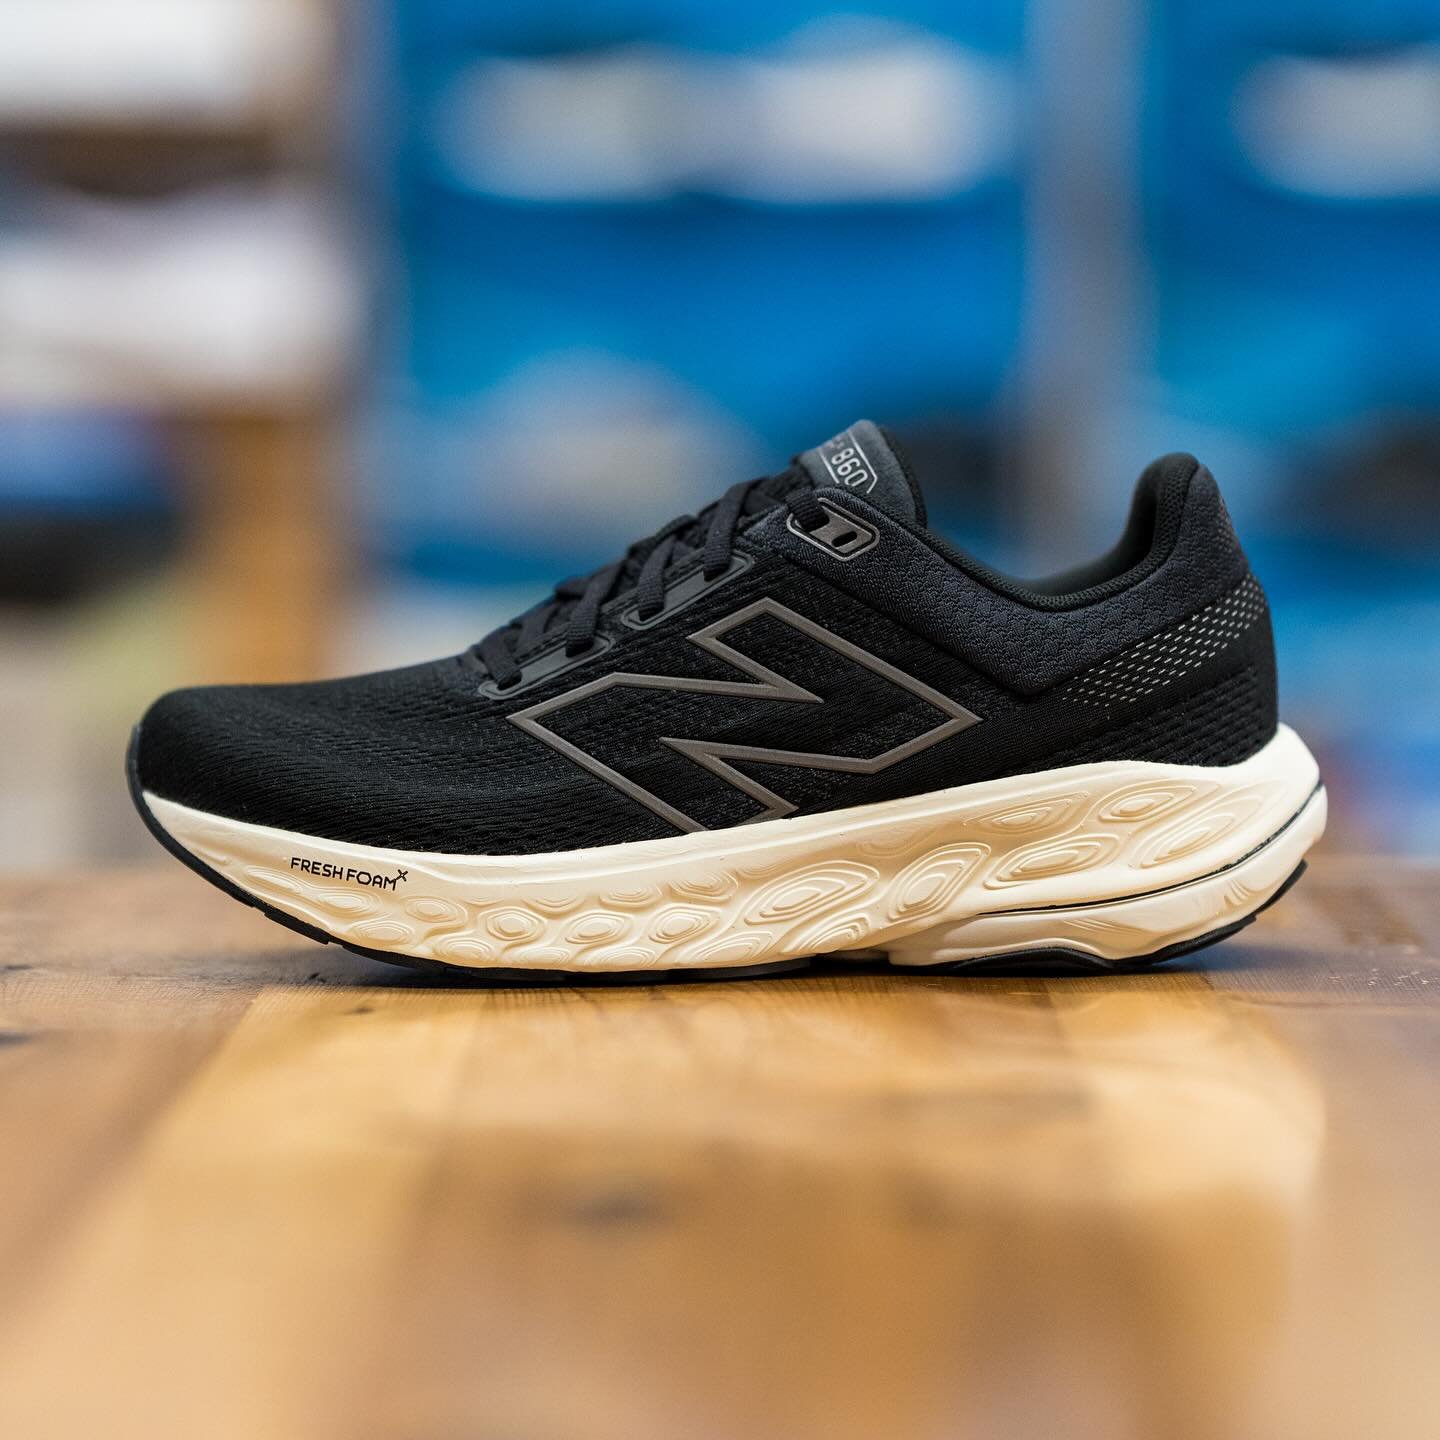 The New Balance Fresh Foam X 860 v14 | One of the most popular franchises in running is back with a BRAND NEW update. Whether it&rsquo;s daily running, walking, or long days on your feet the 860 has been a reliable stability shoe for many. 

New to t